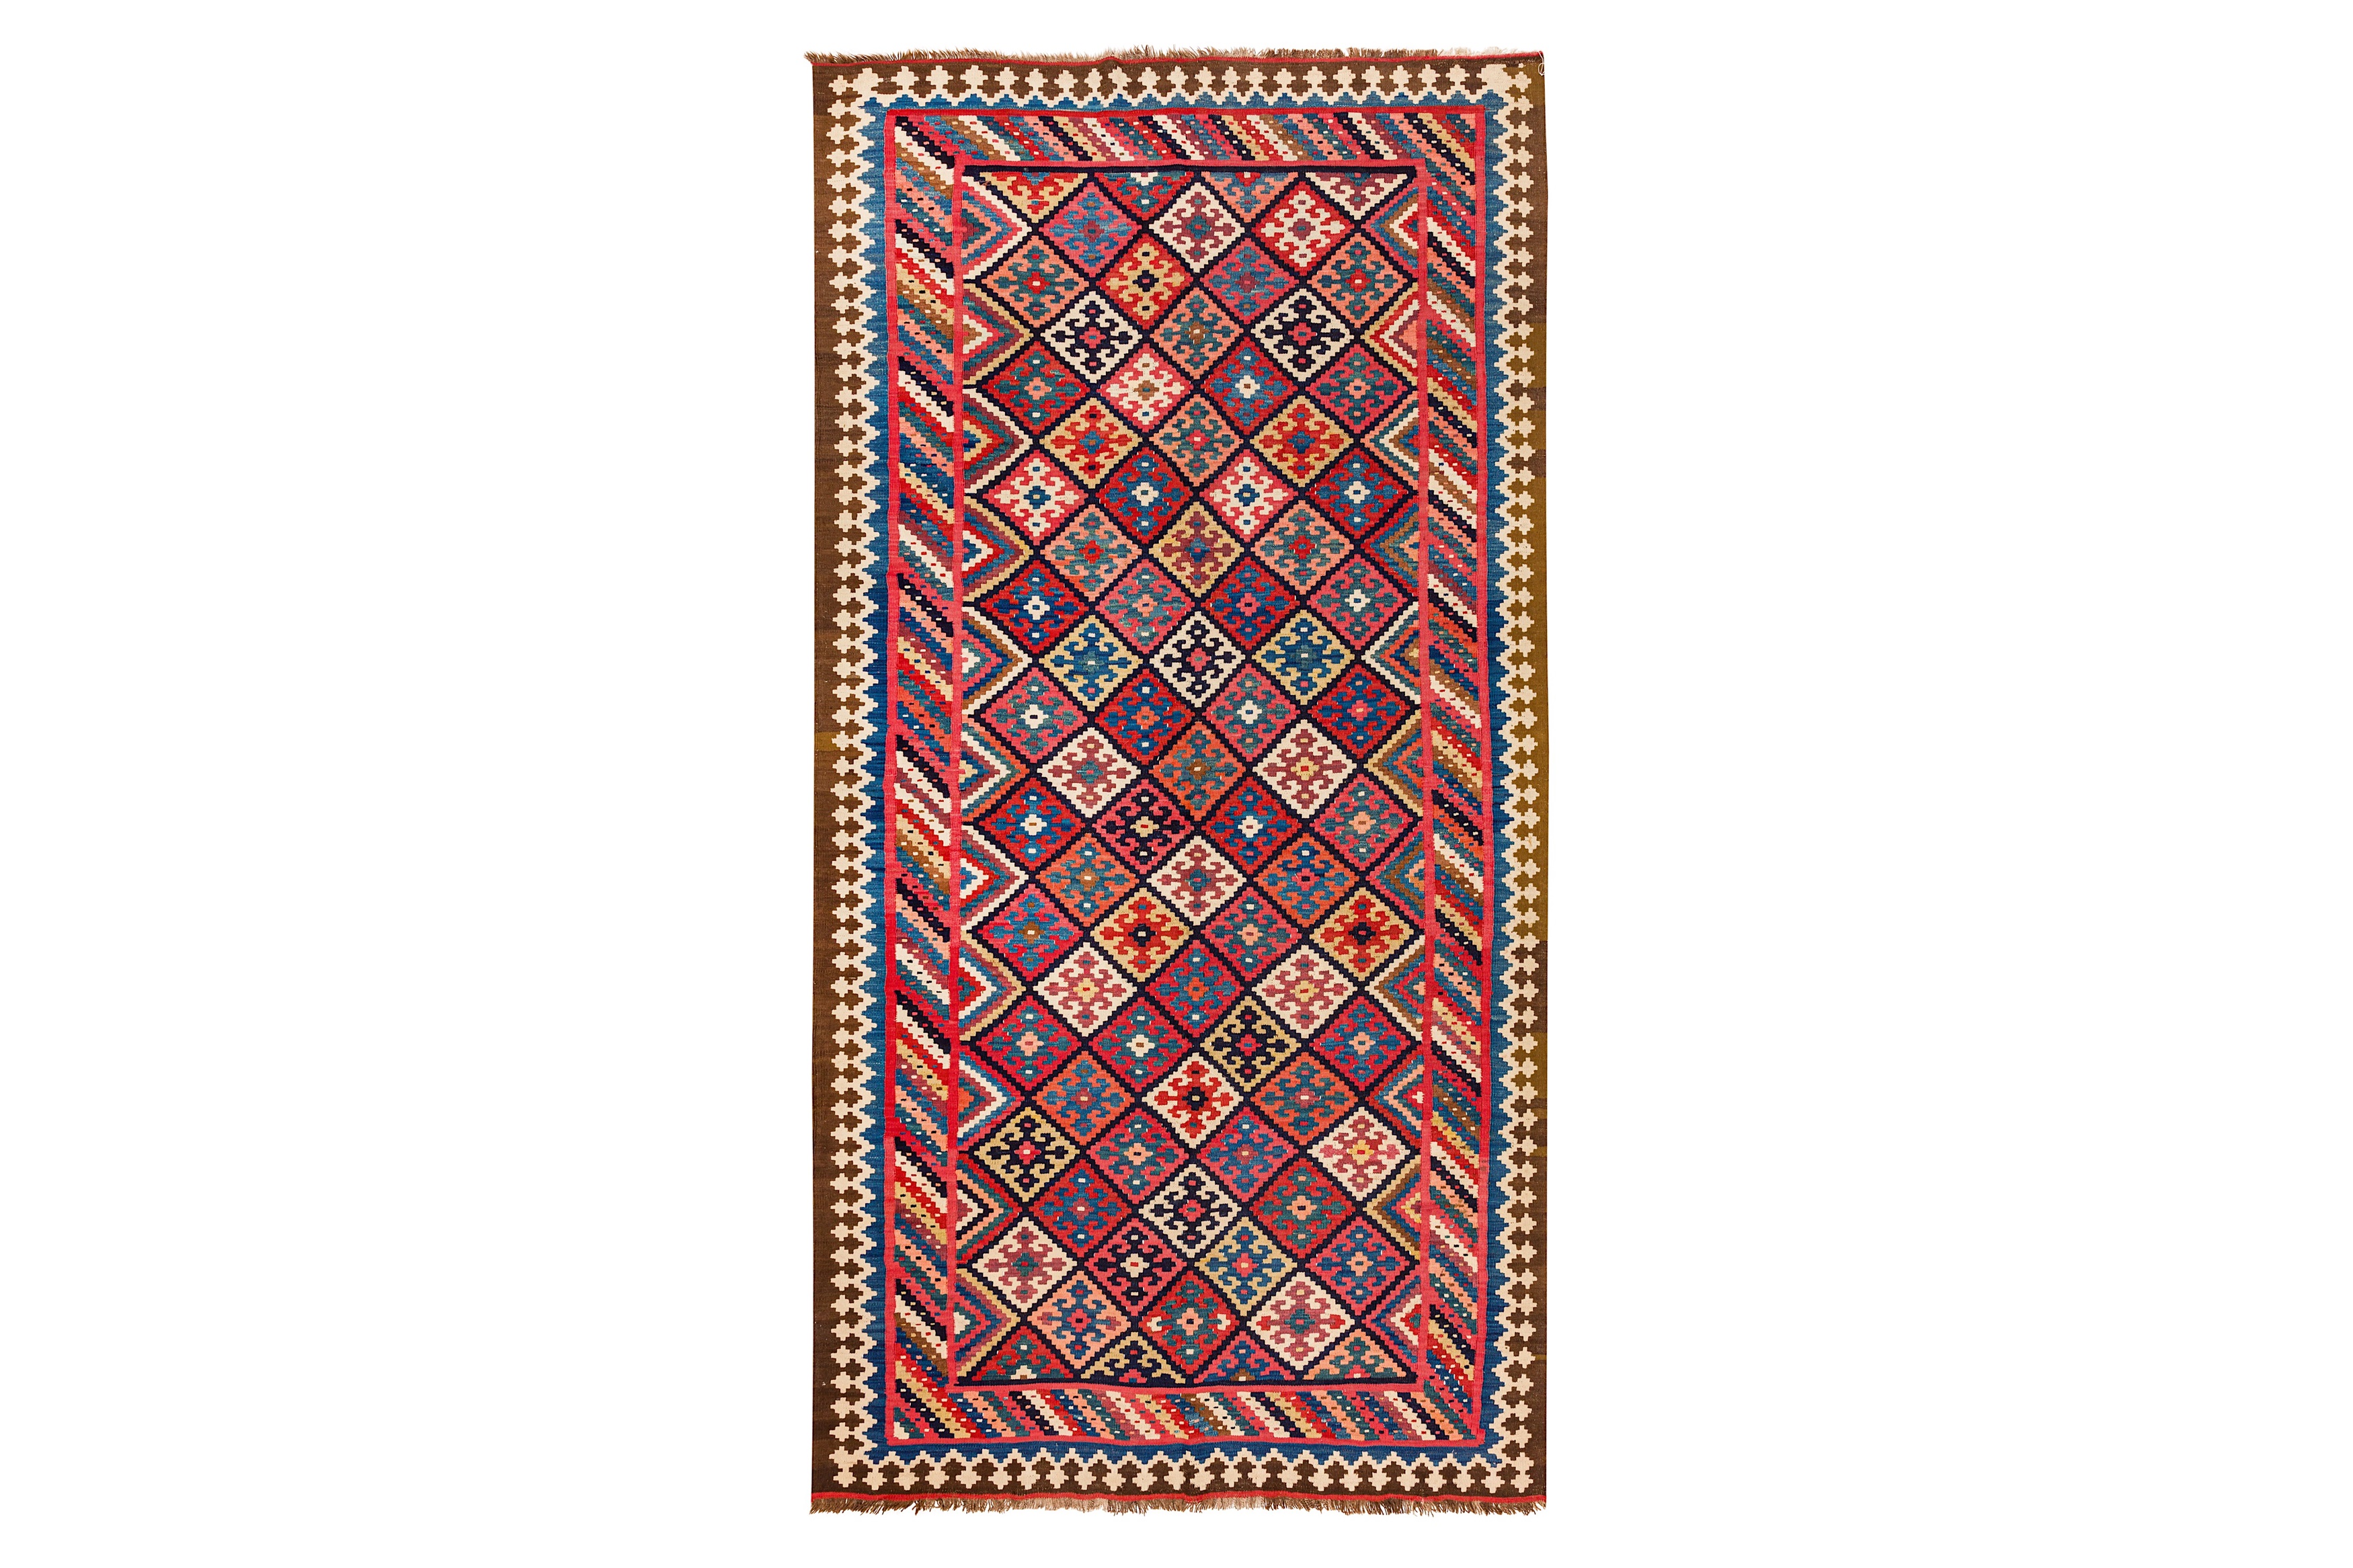 AN ANTIQUE NORTH-WEST PERSIAN KILIM